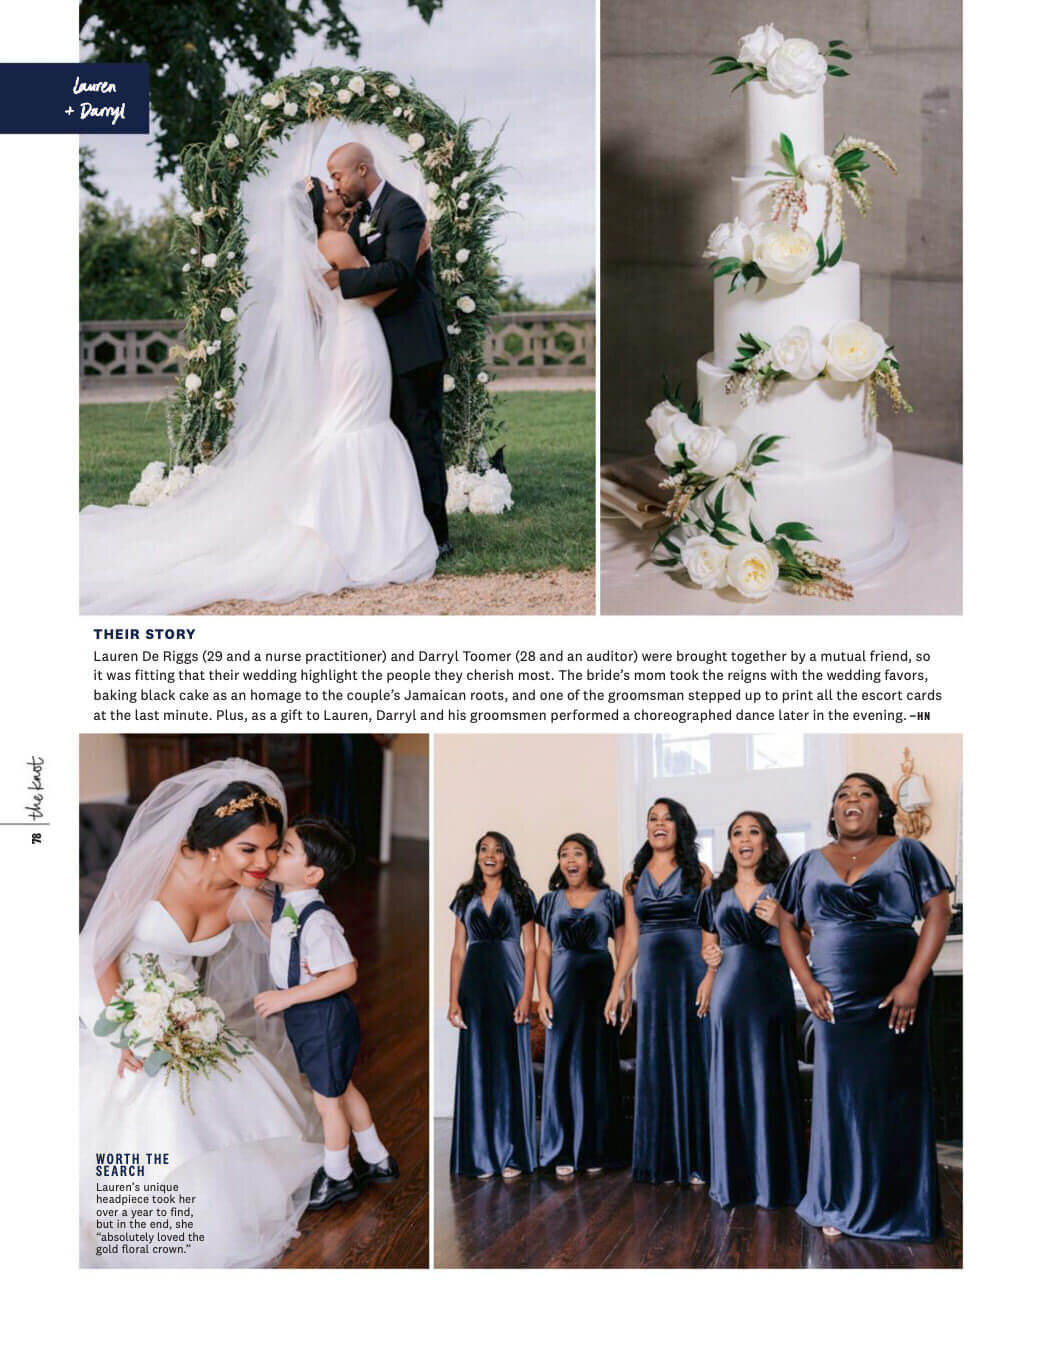 A page in The Knot Magazine where there are images of the bride and groom, bridesmaids, wedding cake. Image by Jenny Fu Studio